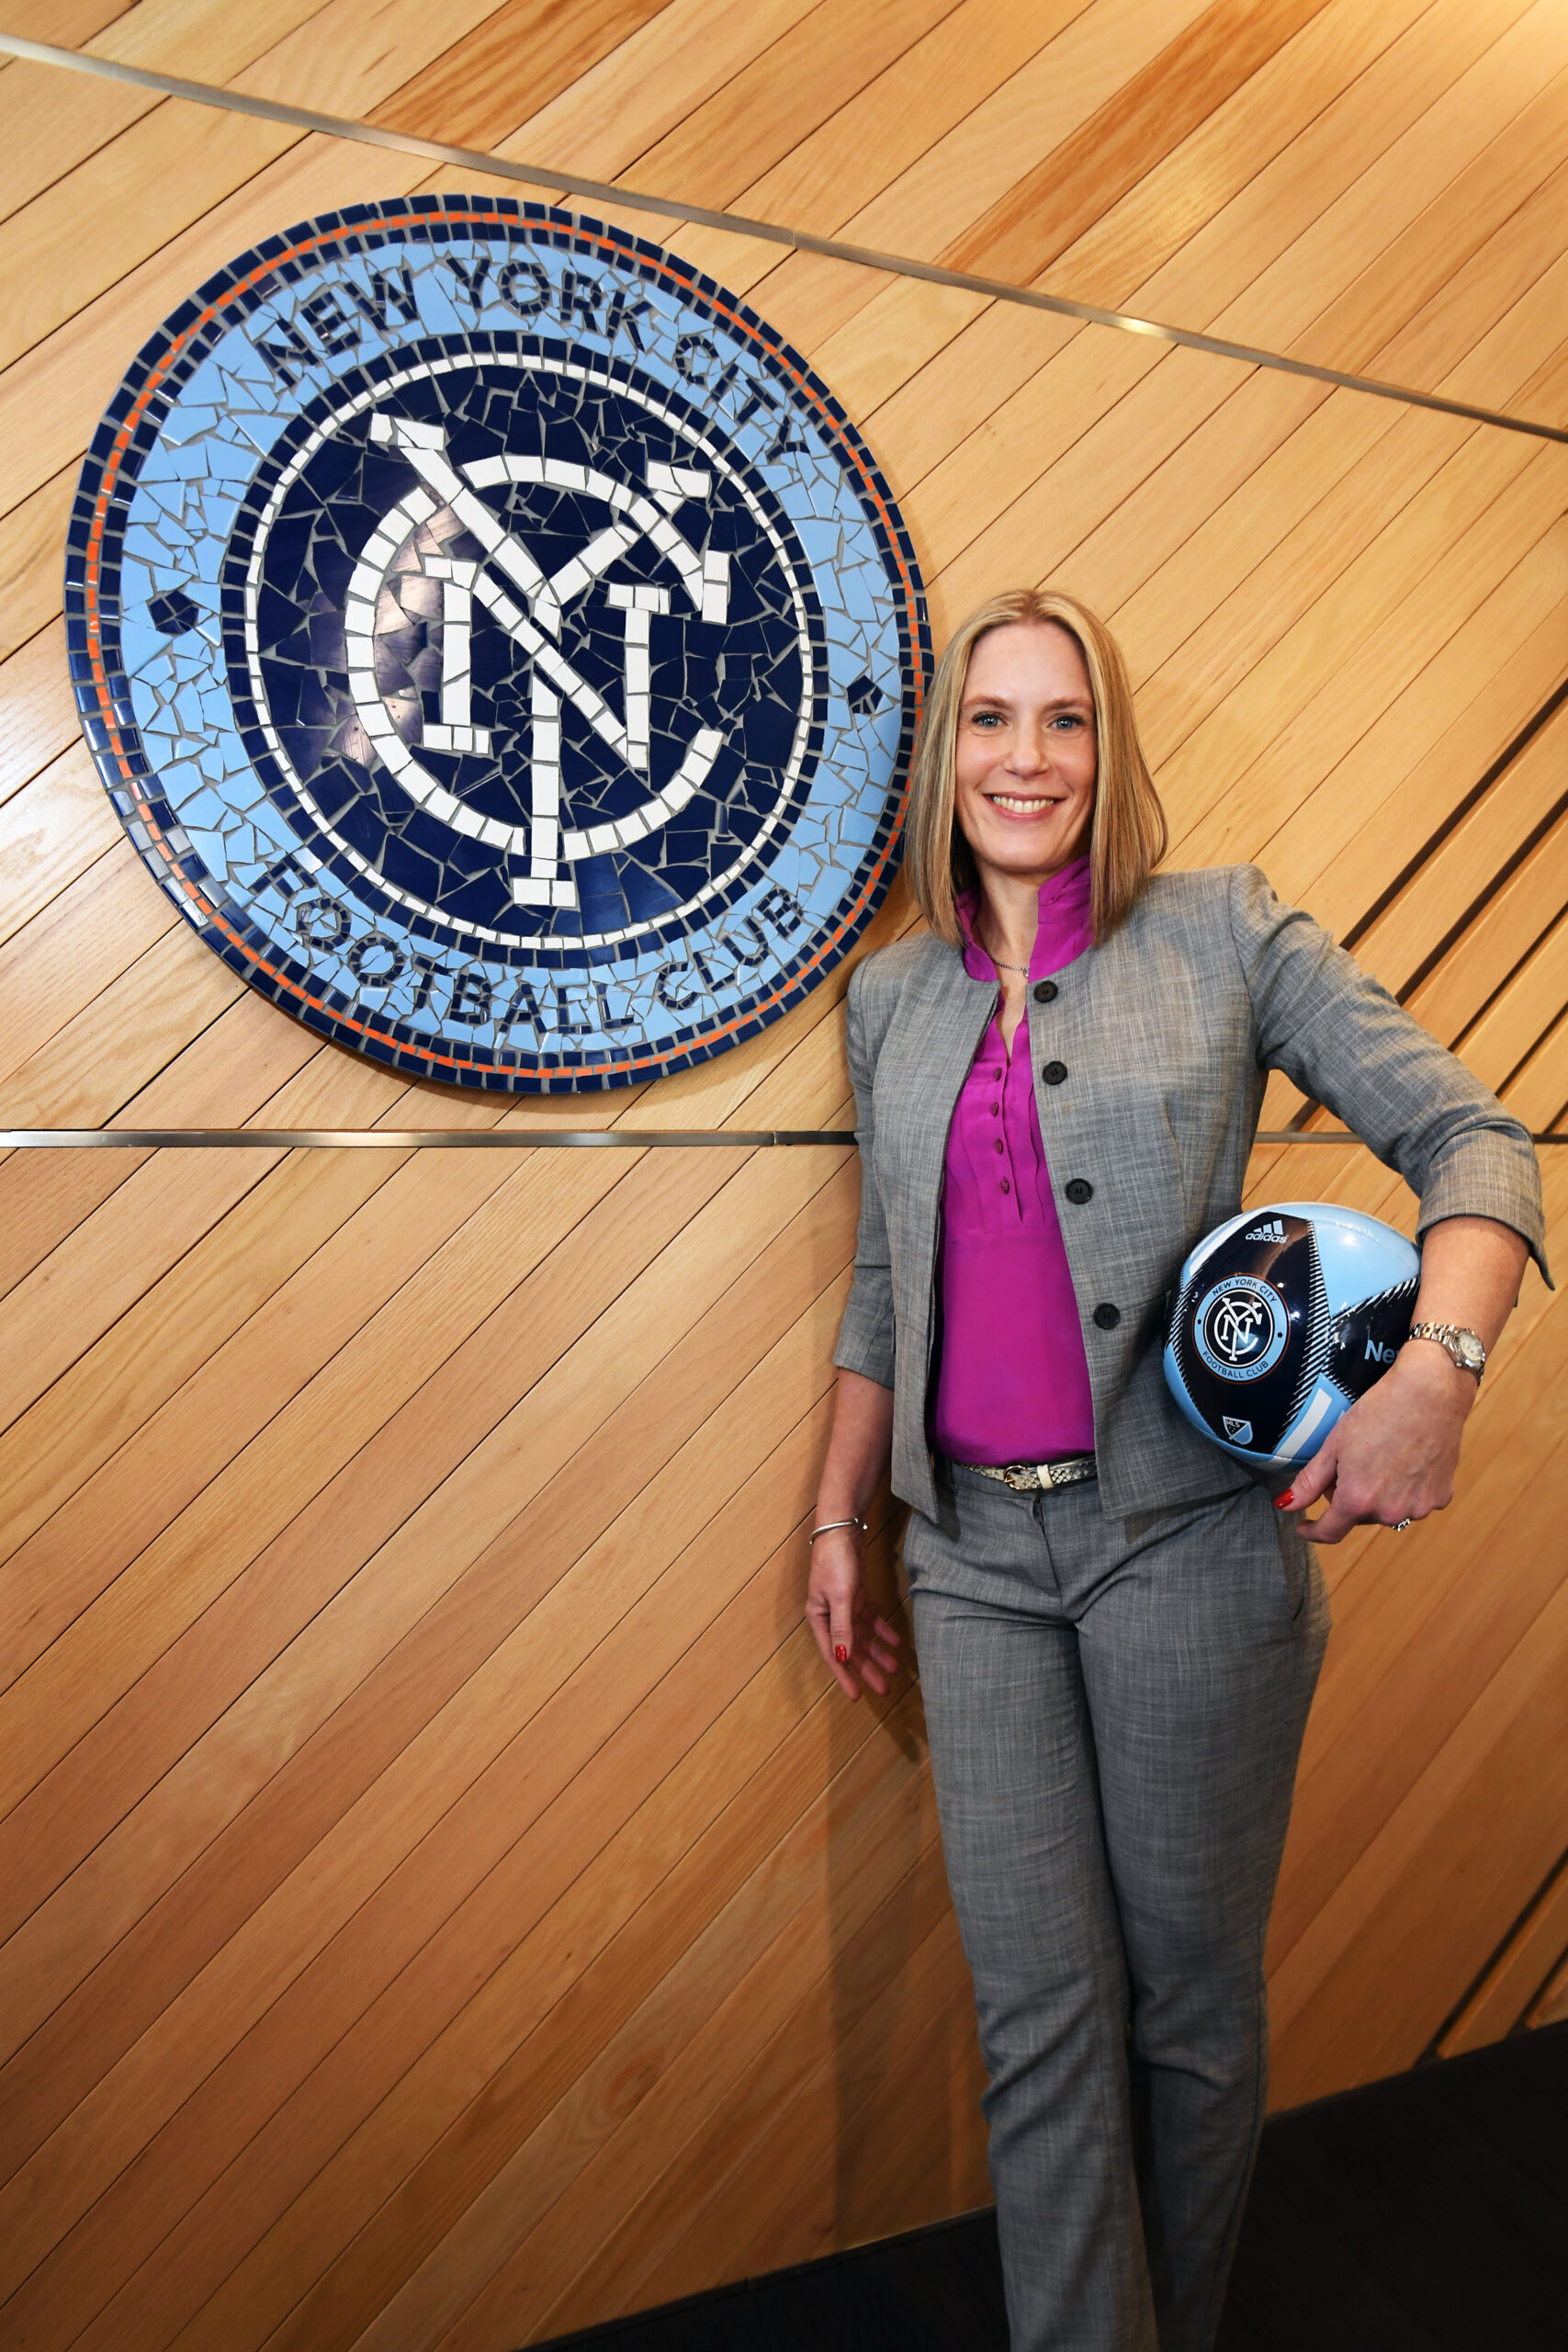 NYCFC Willets Point Stadium to Revolutionize Soccer in NYC, says C.O.O.